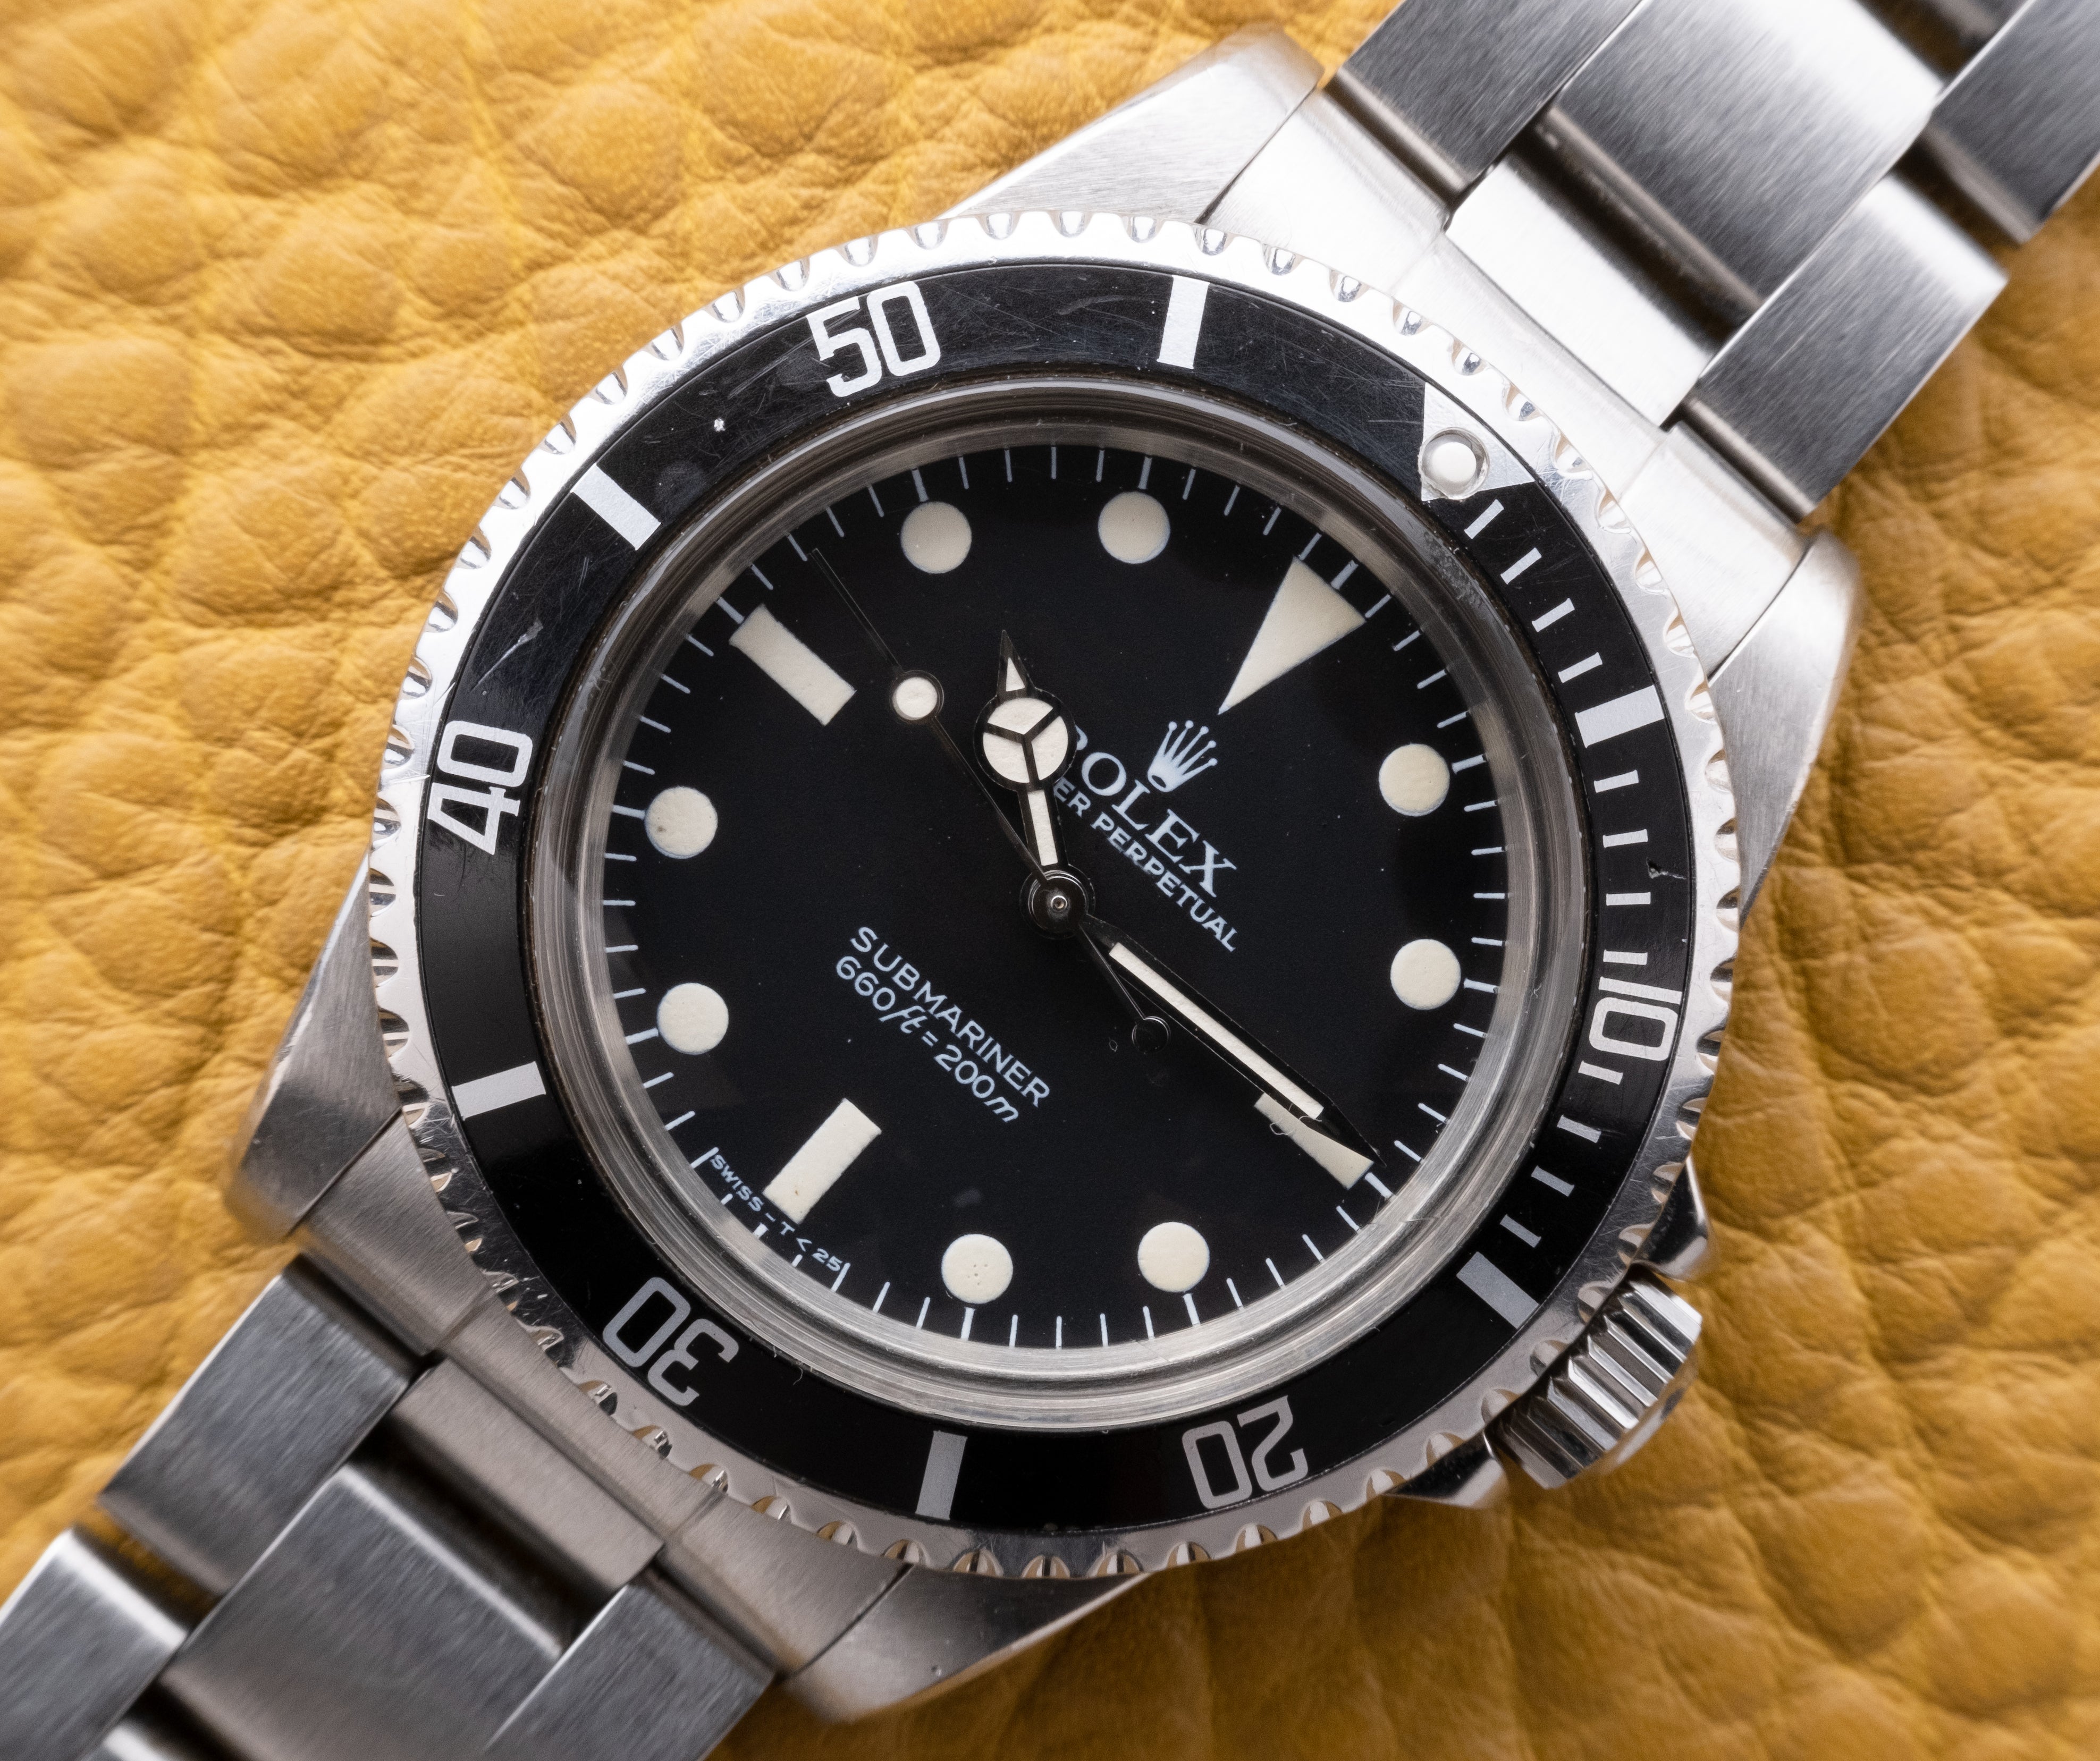 ROLEX Submariner Ref. 5513 Mk5 Maxi Dial (Box, Booklet, Service Papers + Guarantee)  (1984)